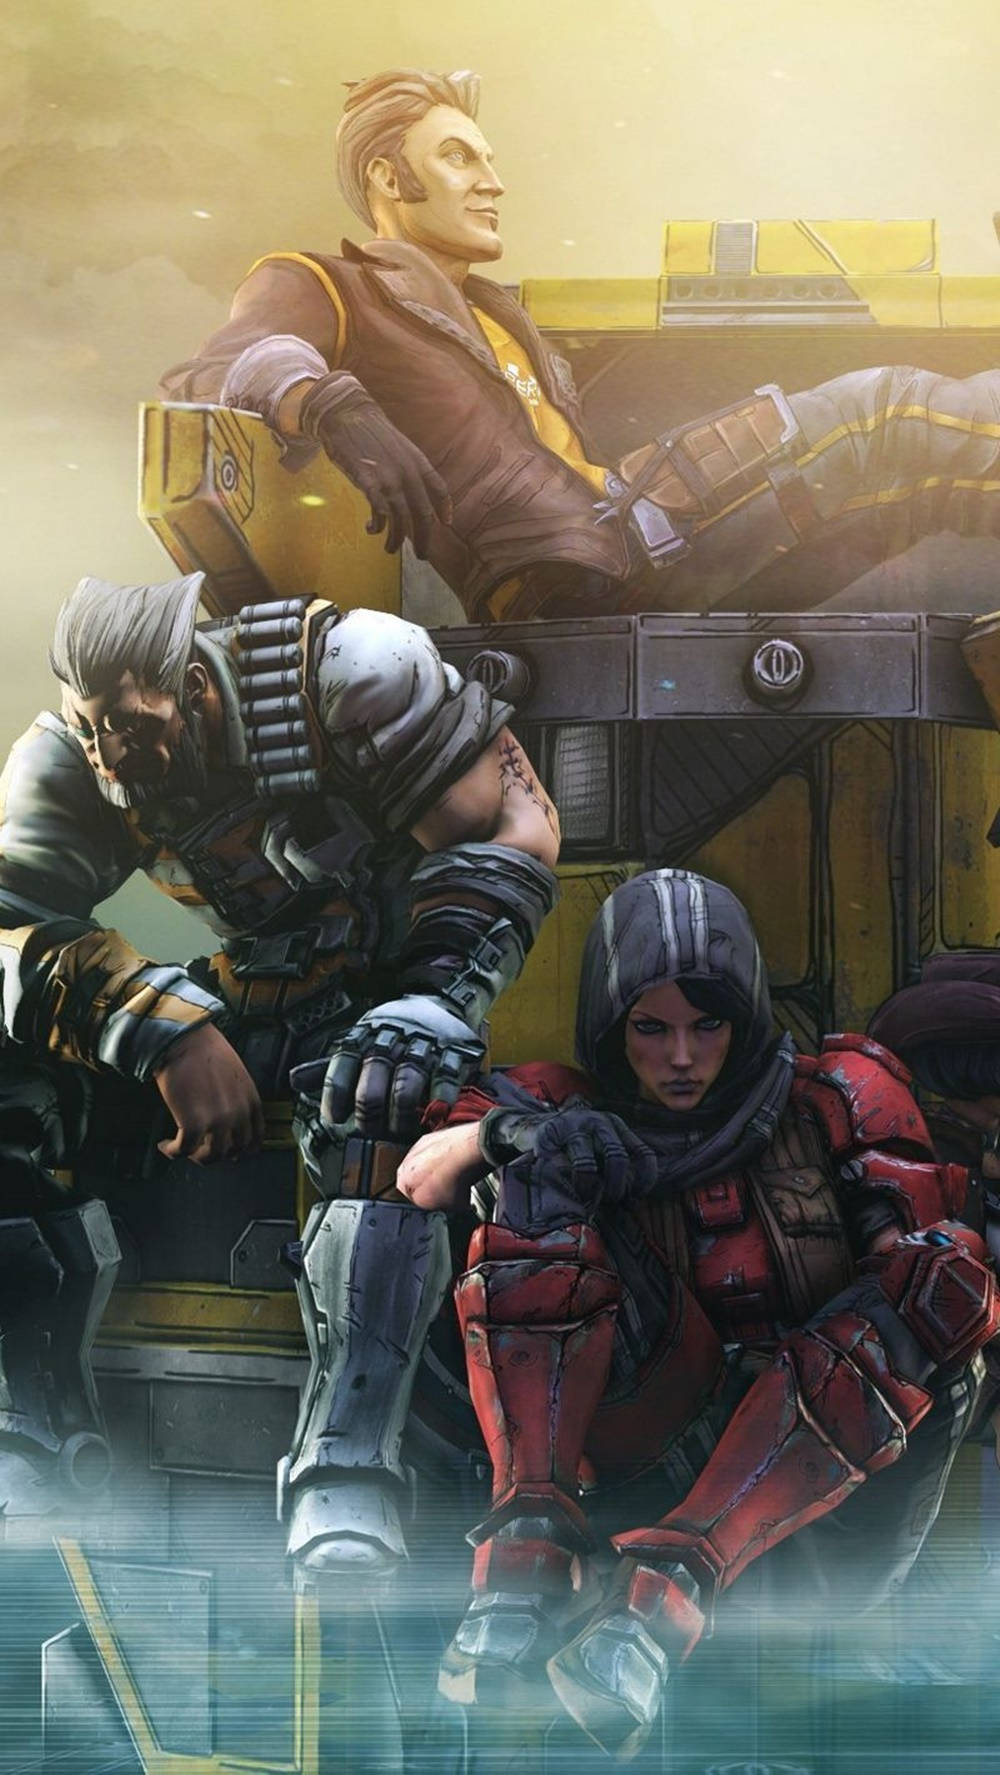 Make A Statement With The Borderlands Iphone Background